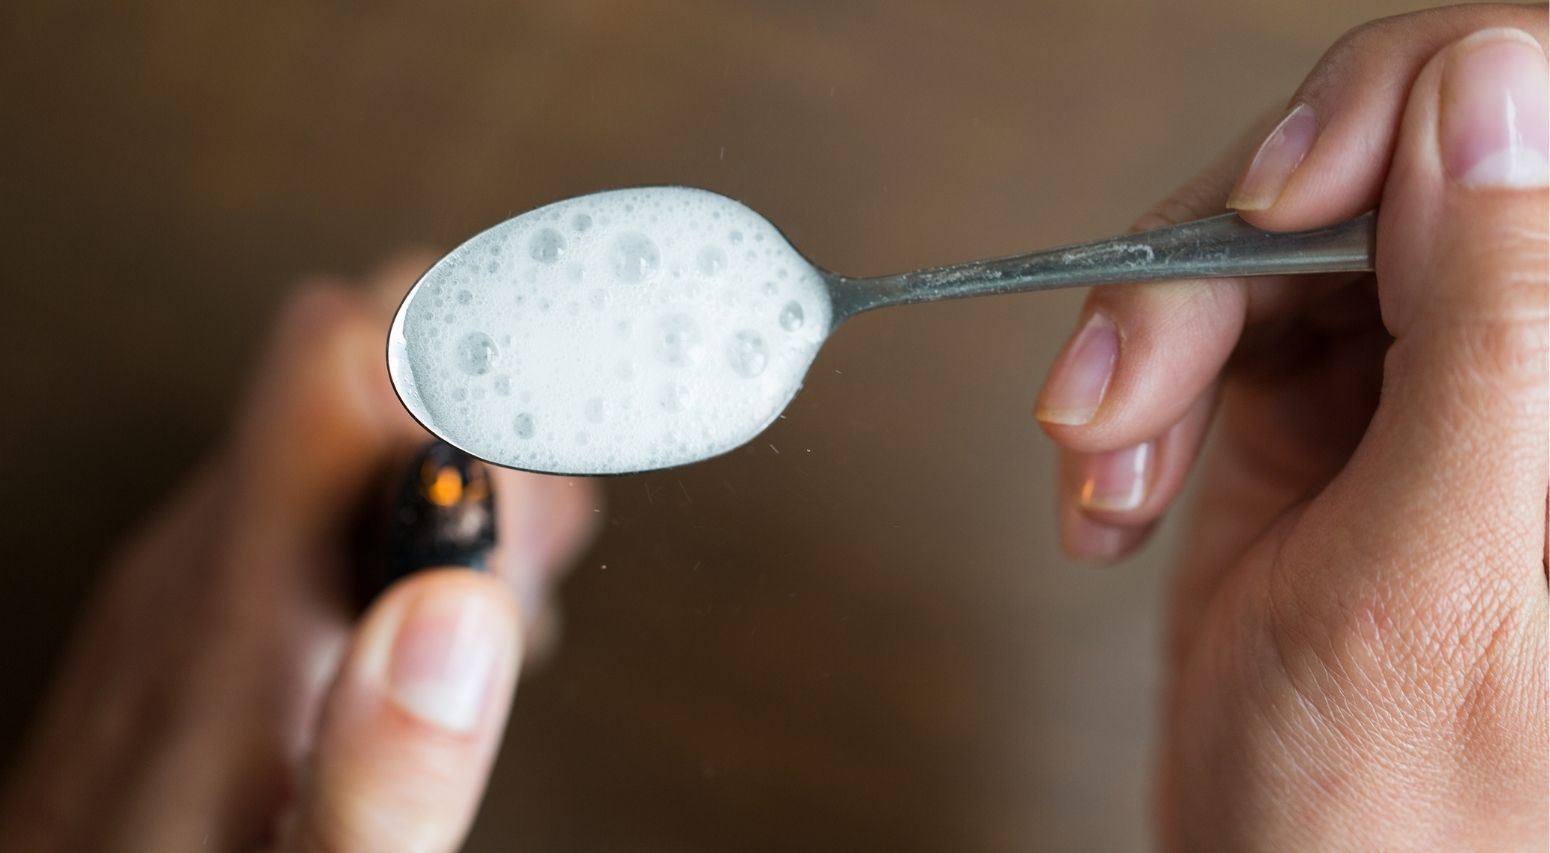 cook cocaine into crack with spoon water and baking soda